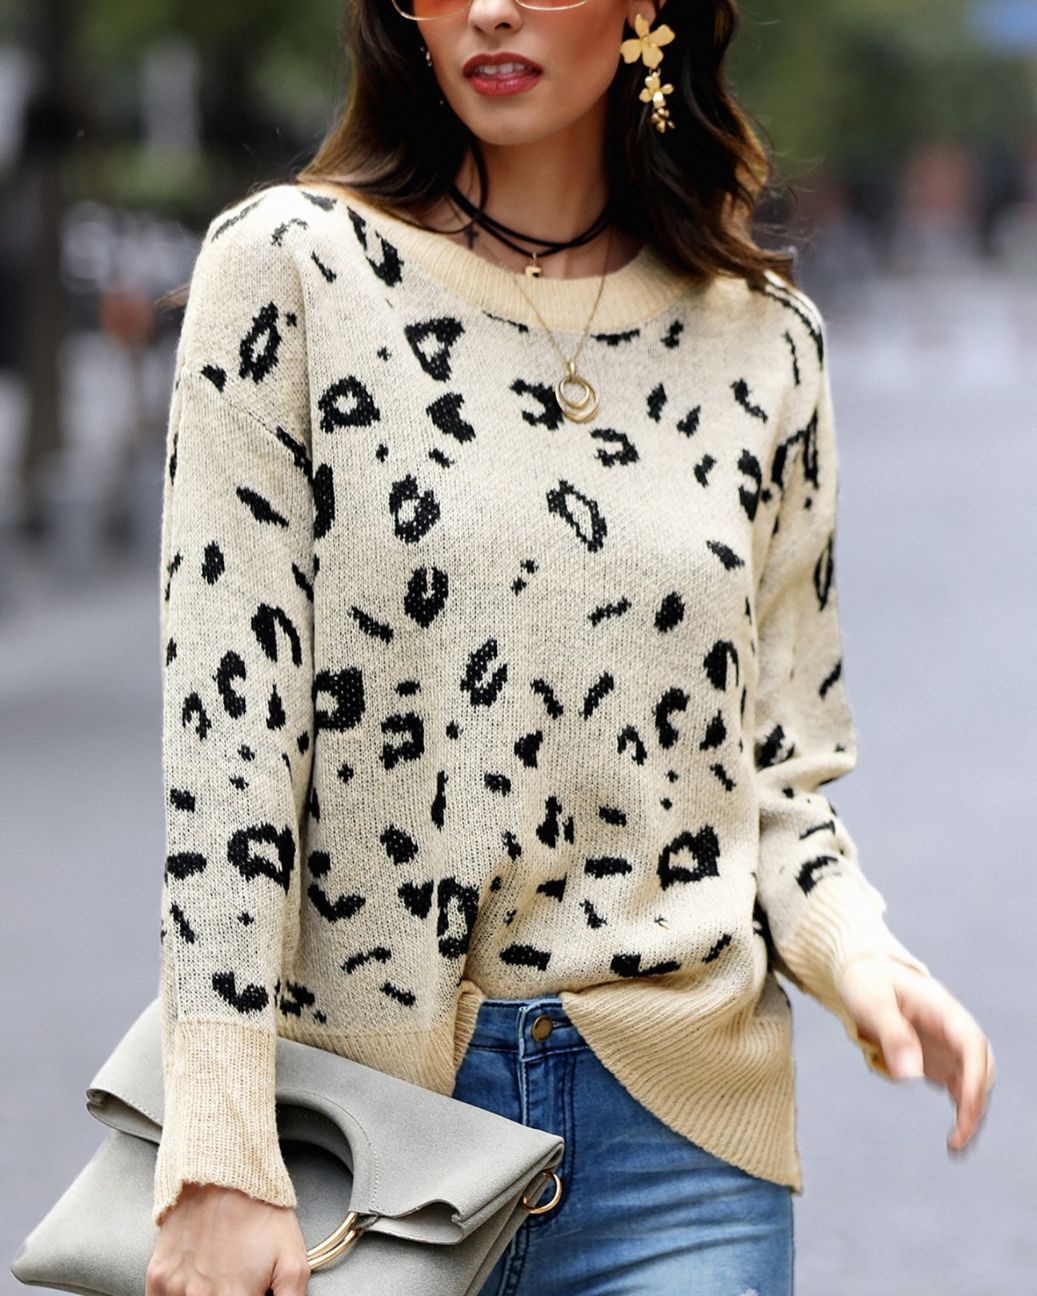 Outlet26 Round Neck Leopard Print Casual Sweater Leopard